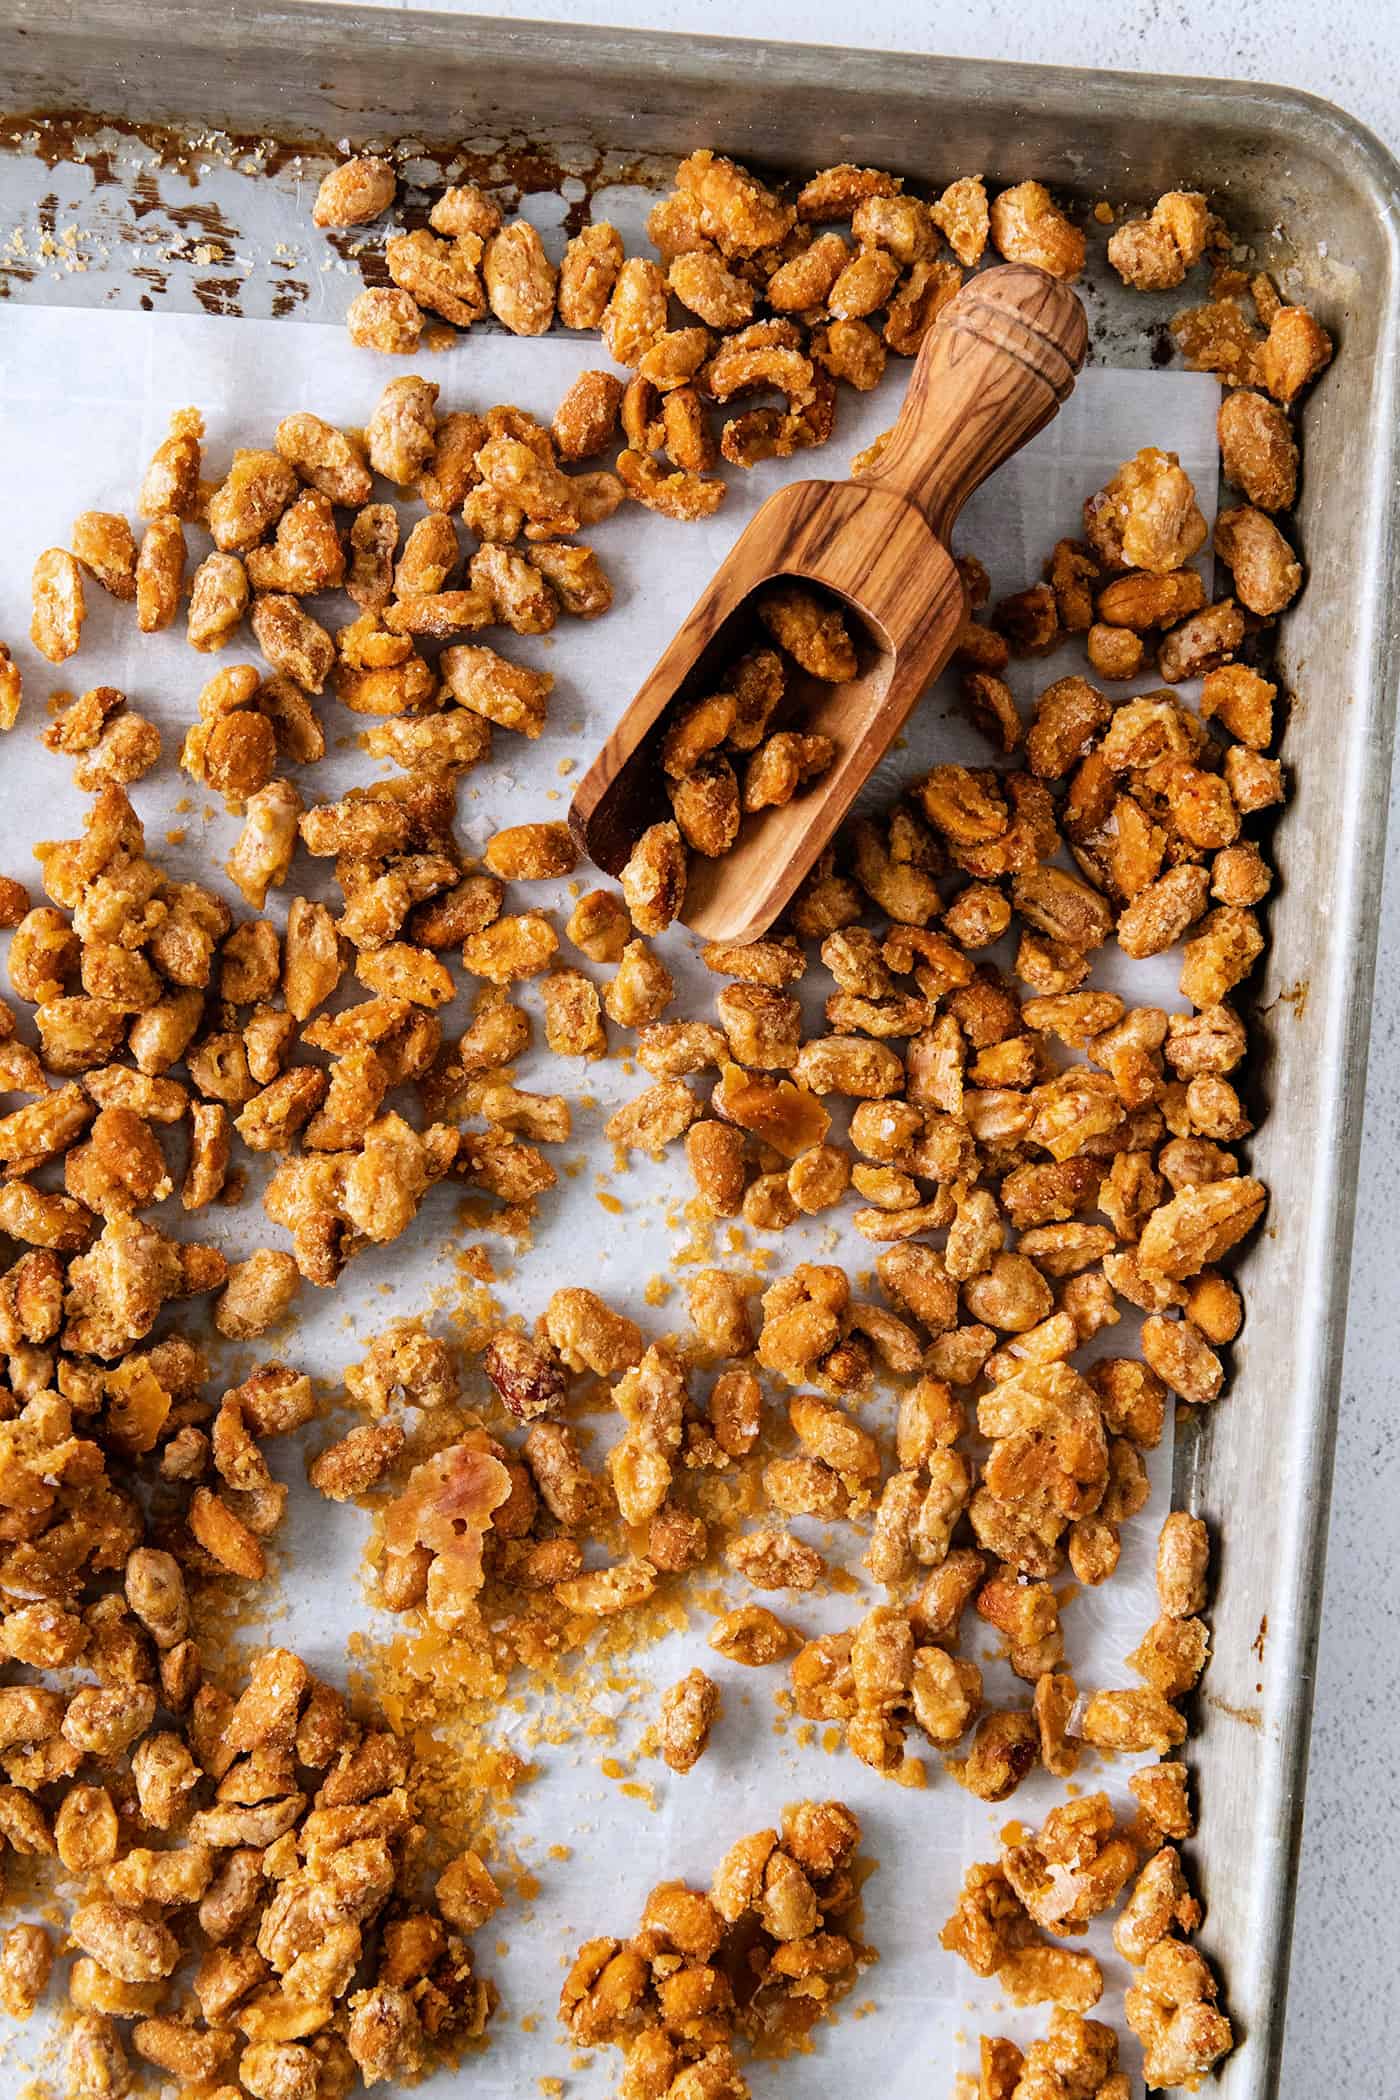 A scoop on a baking sheet of beer nuts